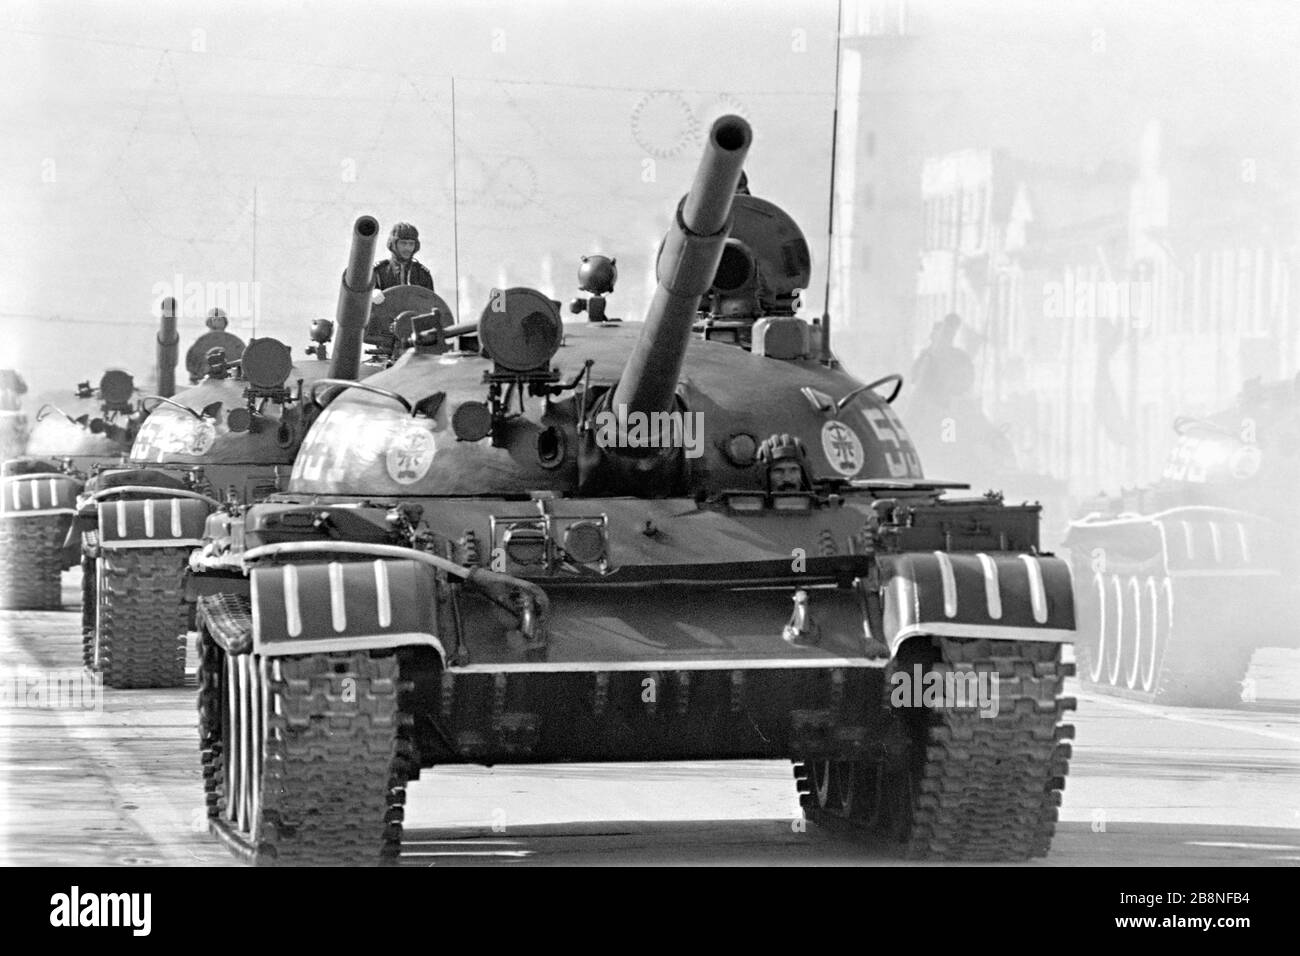 Afghan soldiers ride a Soviet-made T-62 main battle tank during a military parade to mark the tenth anniversary of the communist revolution April 26, 1988 in Kabul, Afghanistan. The communist regime took power in a revolt known as the Saur Revolution backed by the Soviet Union. Stock Photo